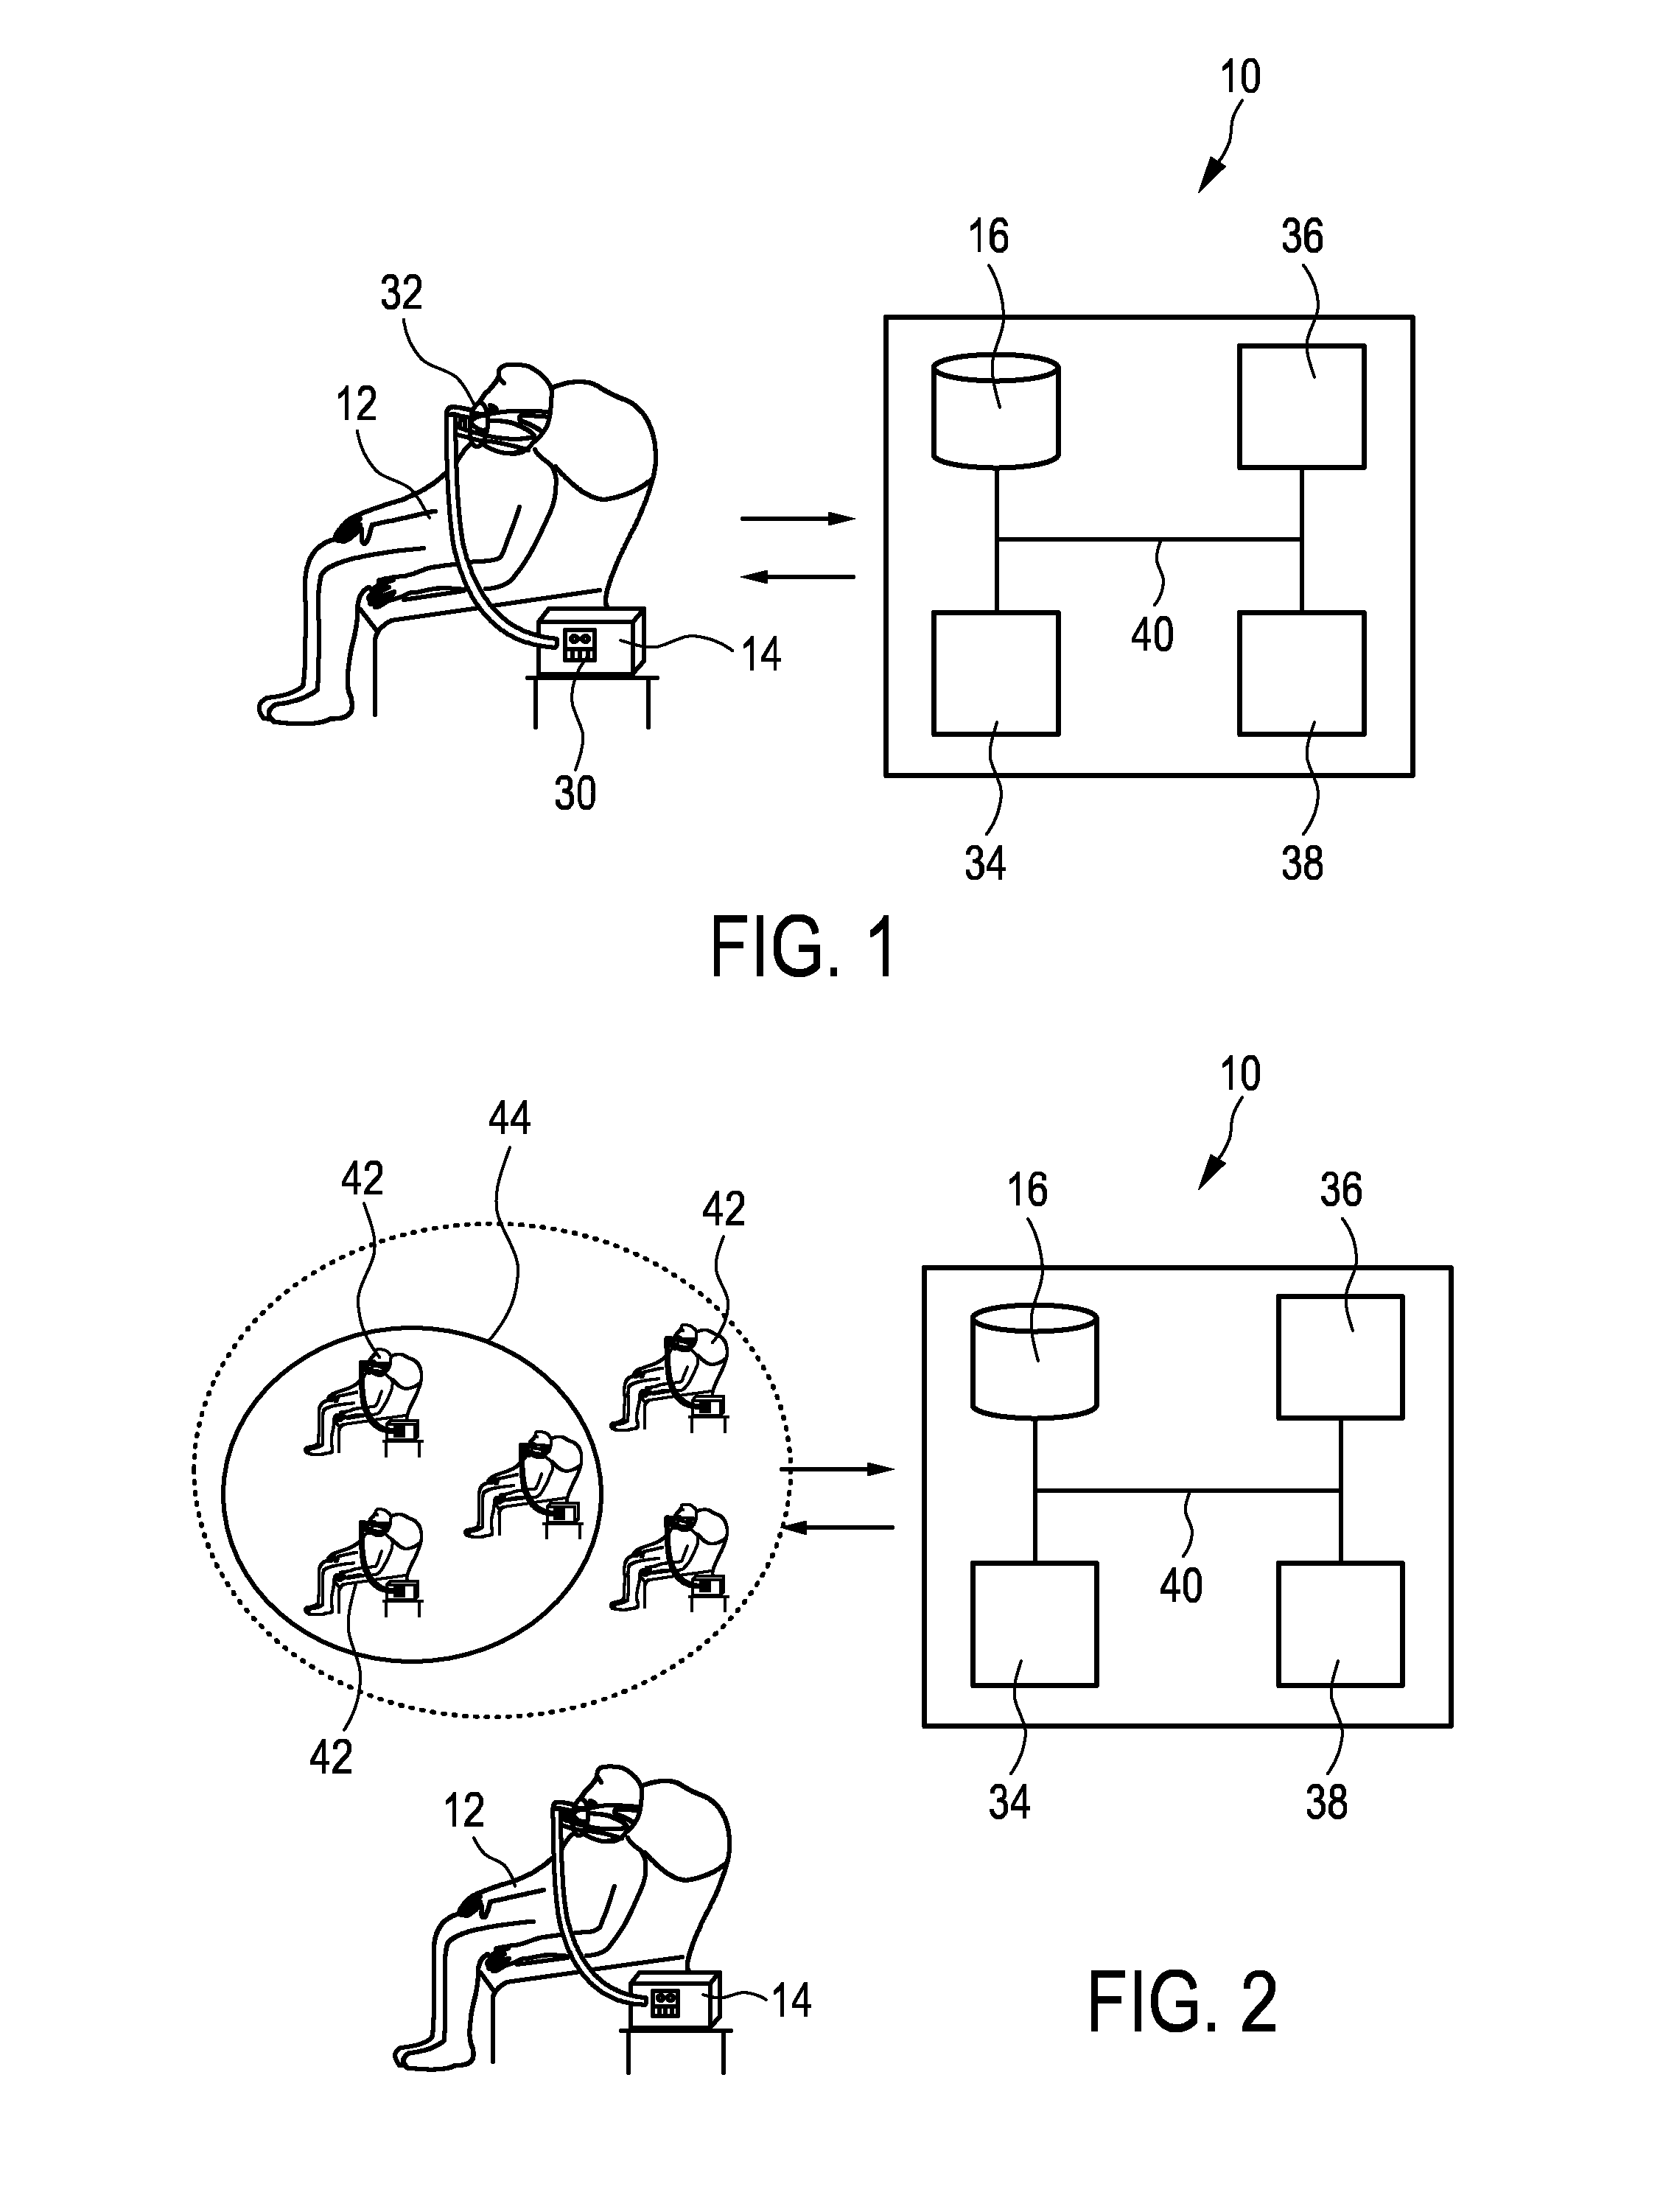 Patient feedback for uses of therapeutic device